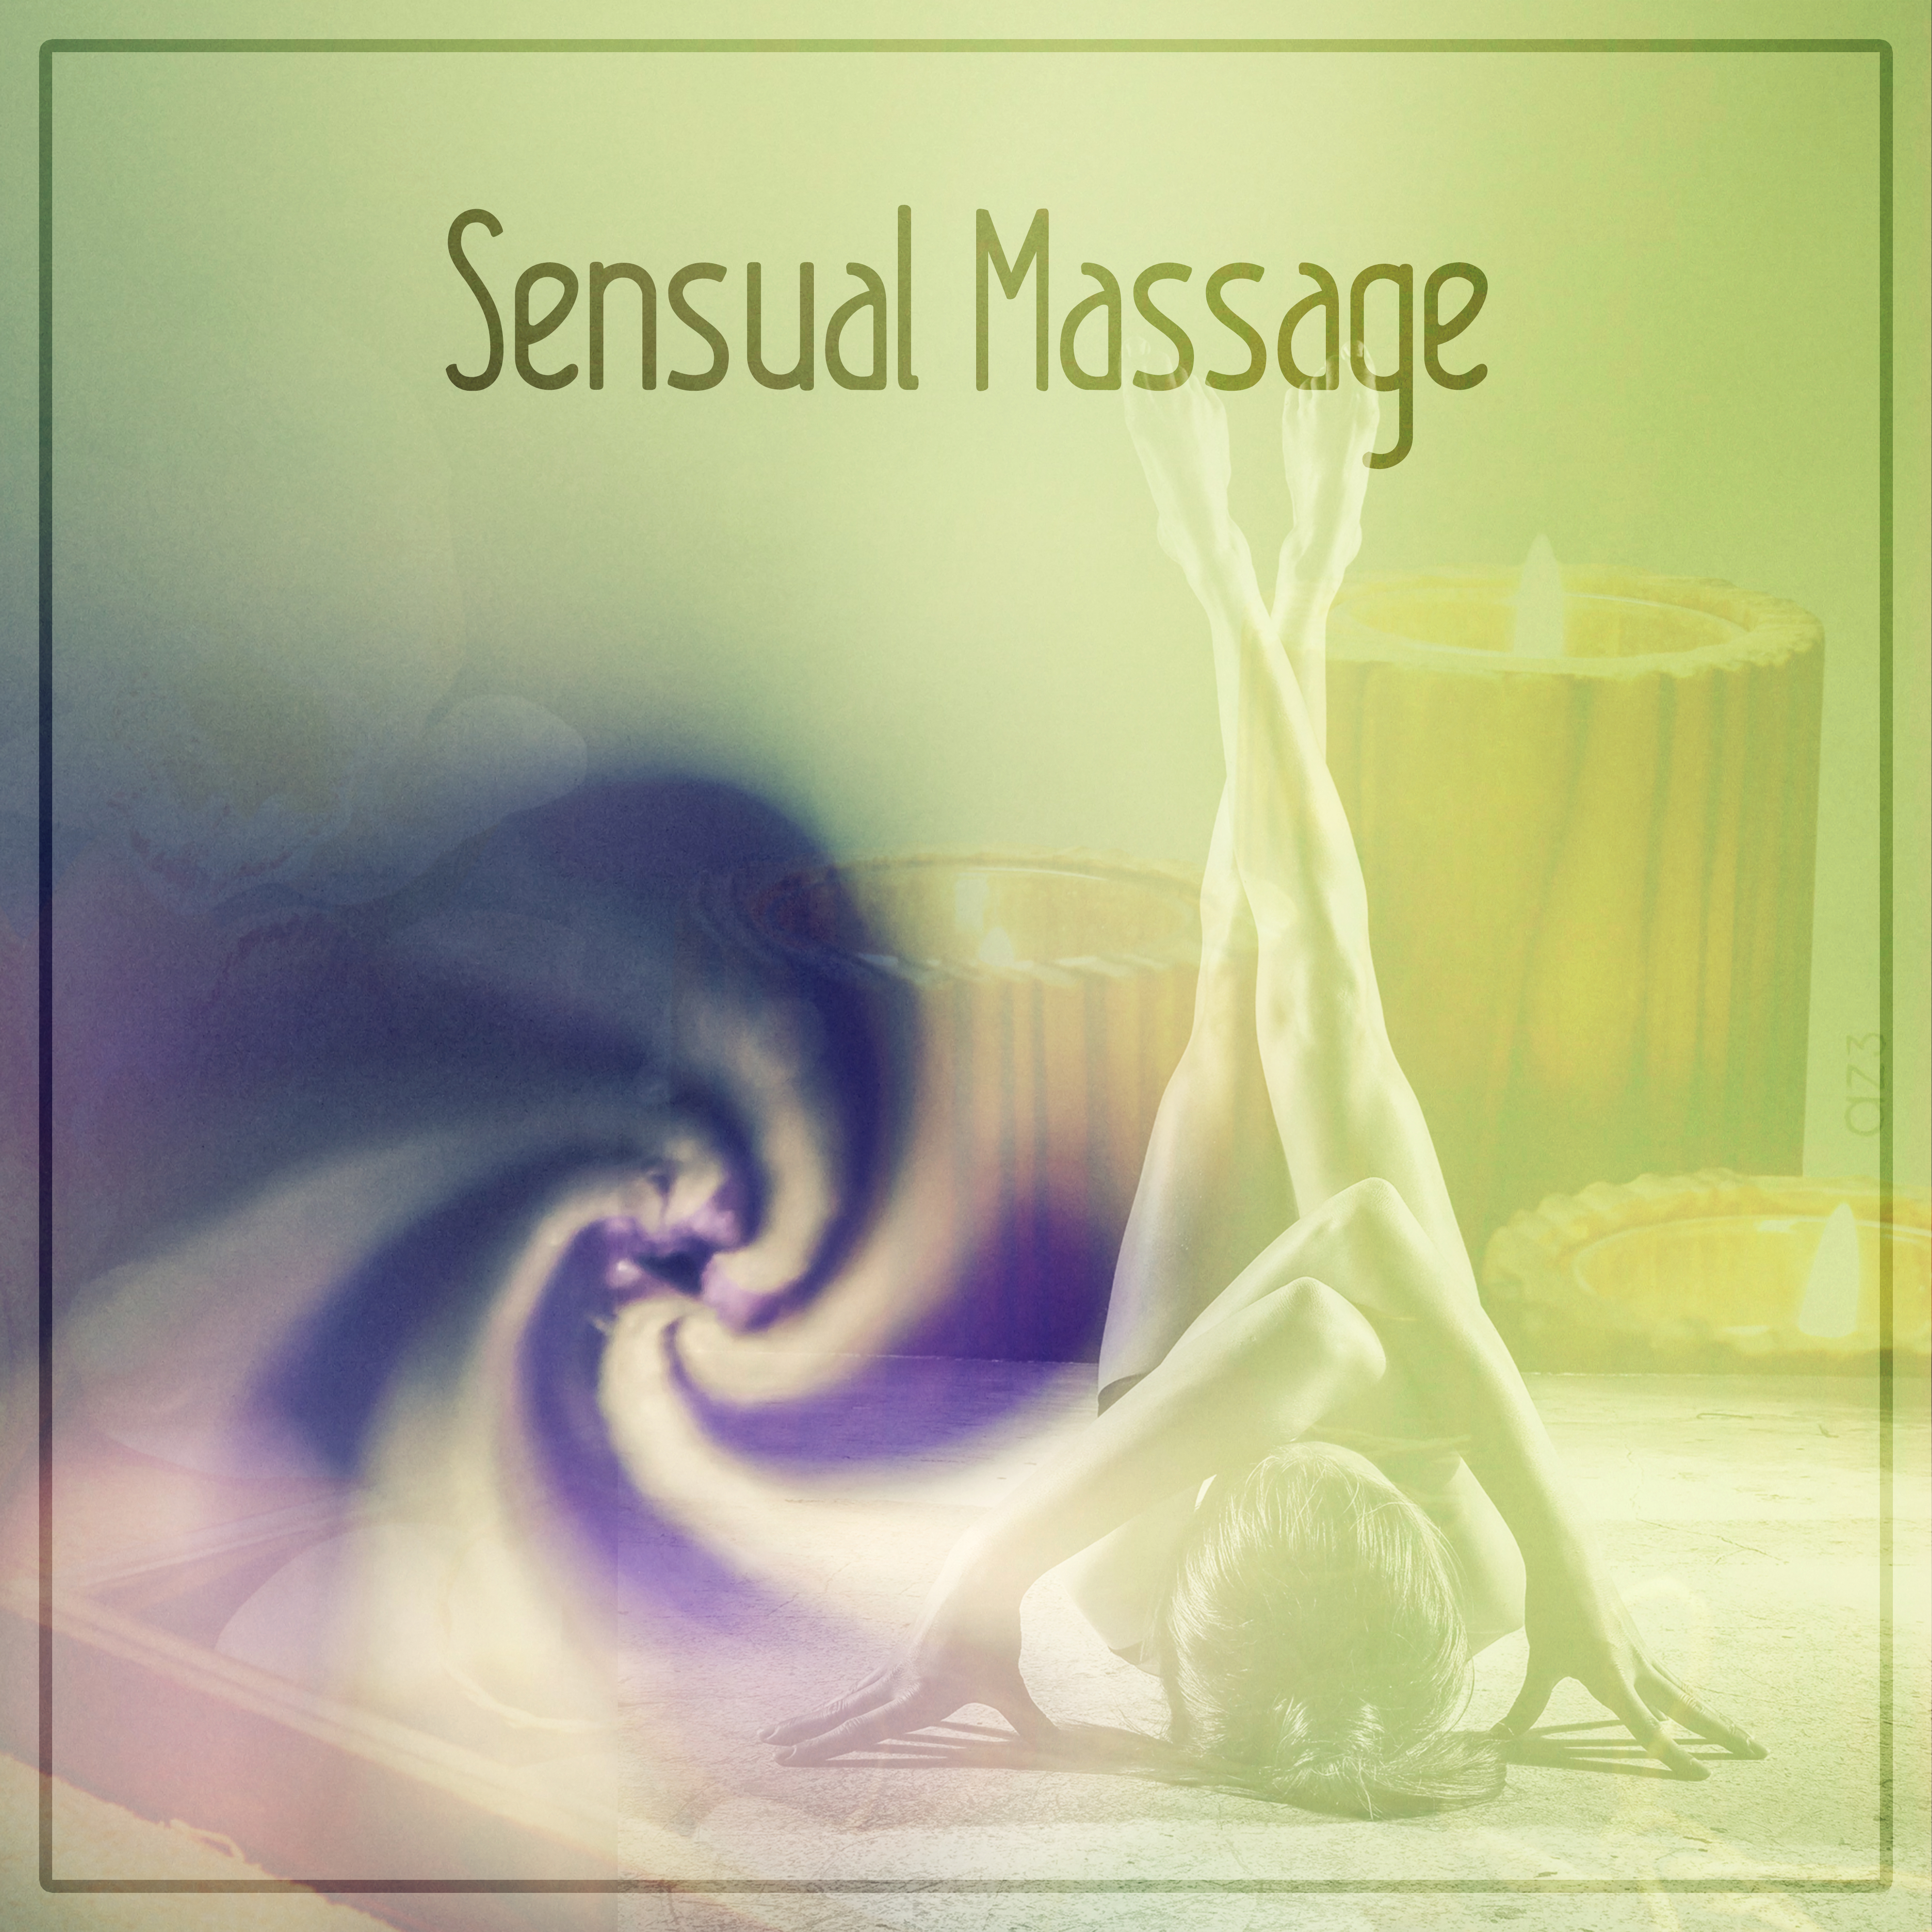 Sensual Massage - Piano Stress Relief, Calming Music, Piano Relaxation Music, Therapy for Relaxation, Guided Meditation, Inner Peace